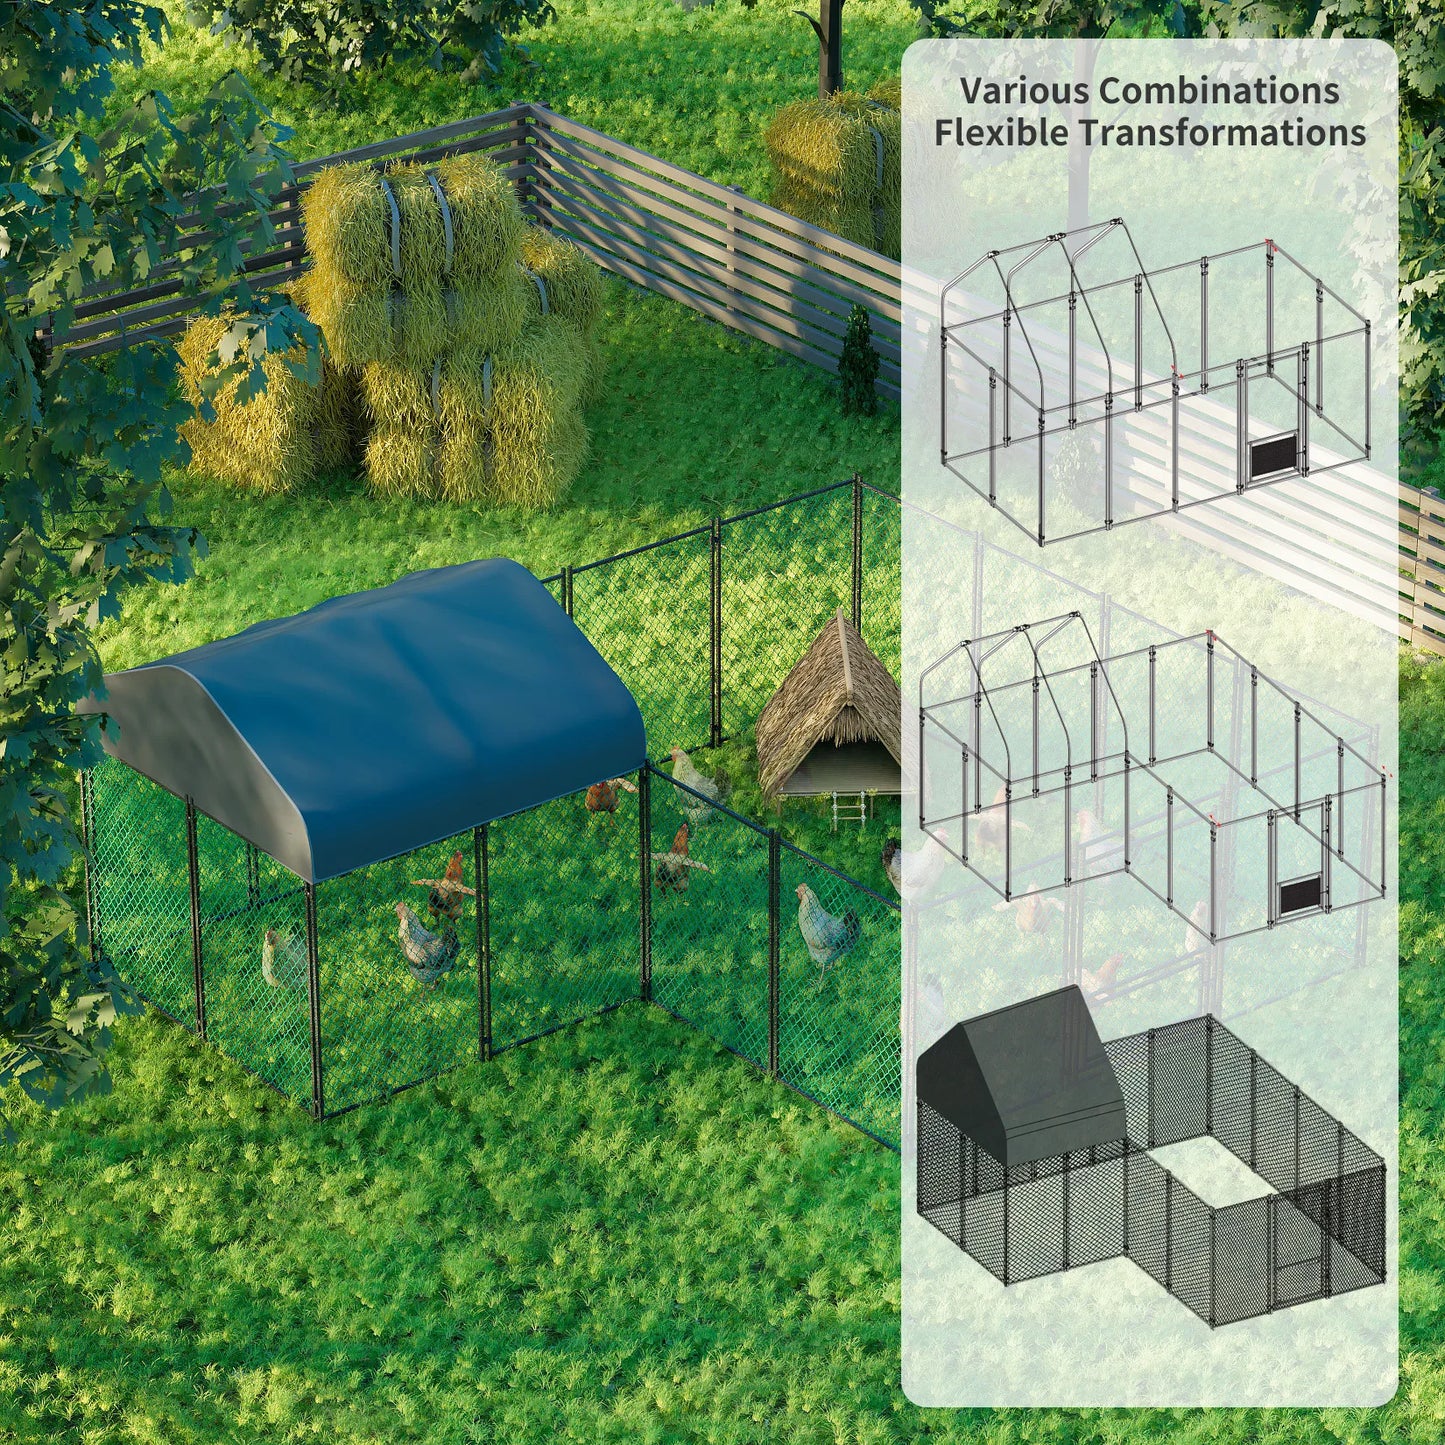 12.9x10.2x5.1ft Chicken Run Pen for Yard with Cover